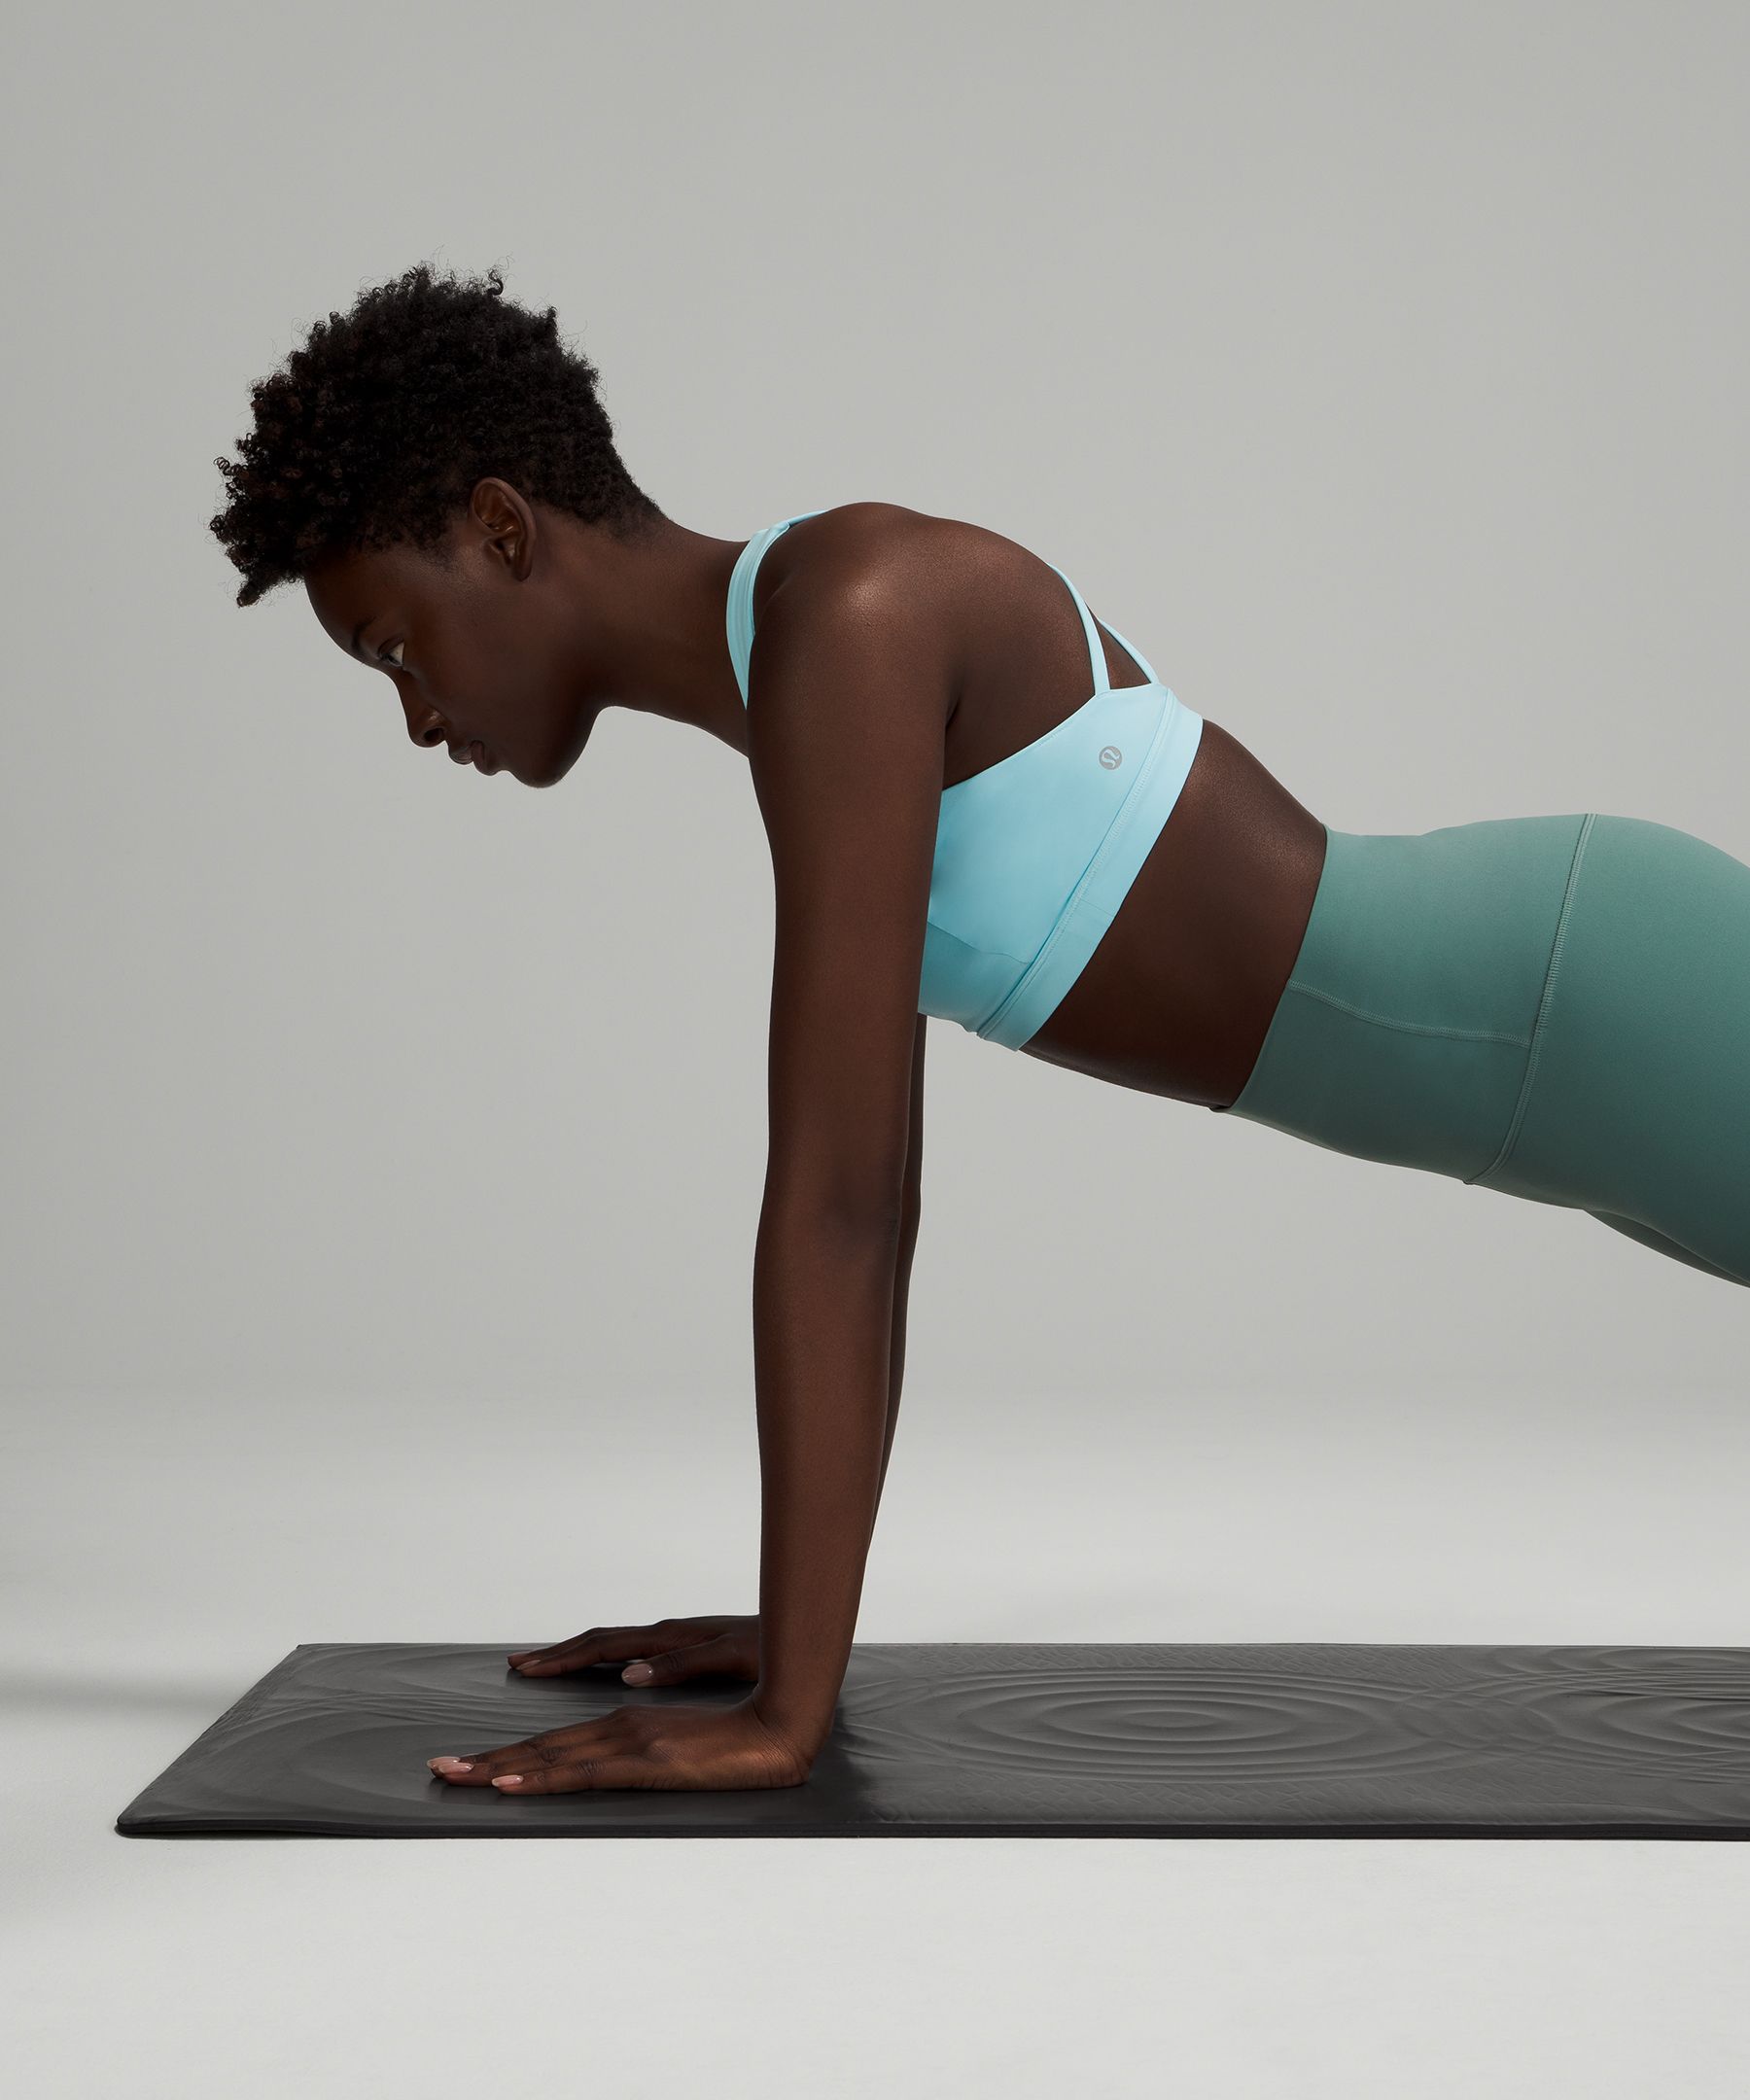 Lululemon Take Form Yoga Mat Review: Does it work and is it worth